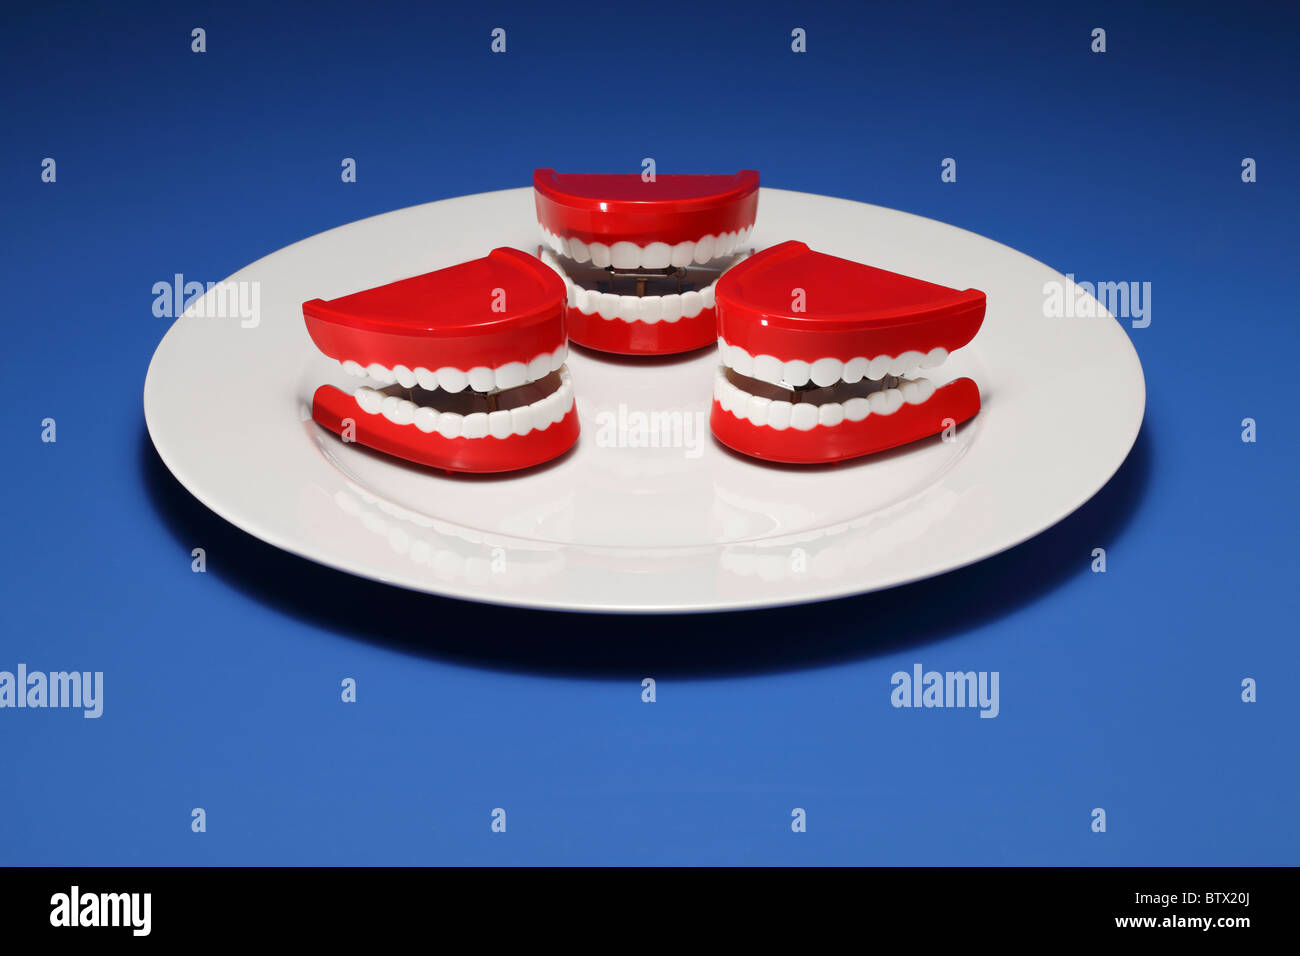 Three plastic gums and teeth on a white dinner plate Stock Photo